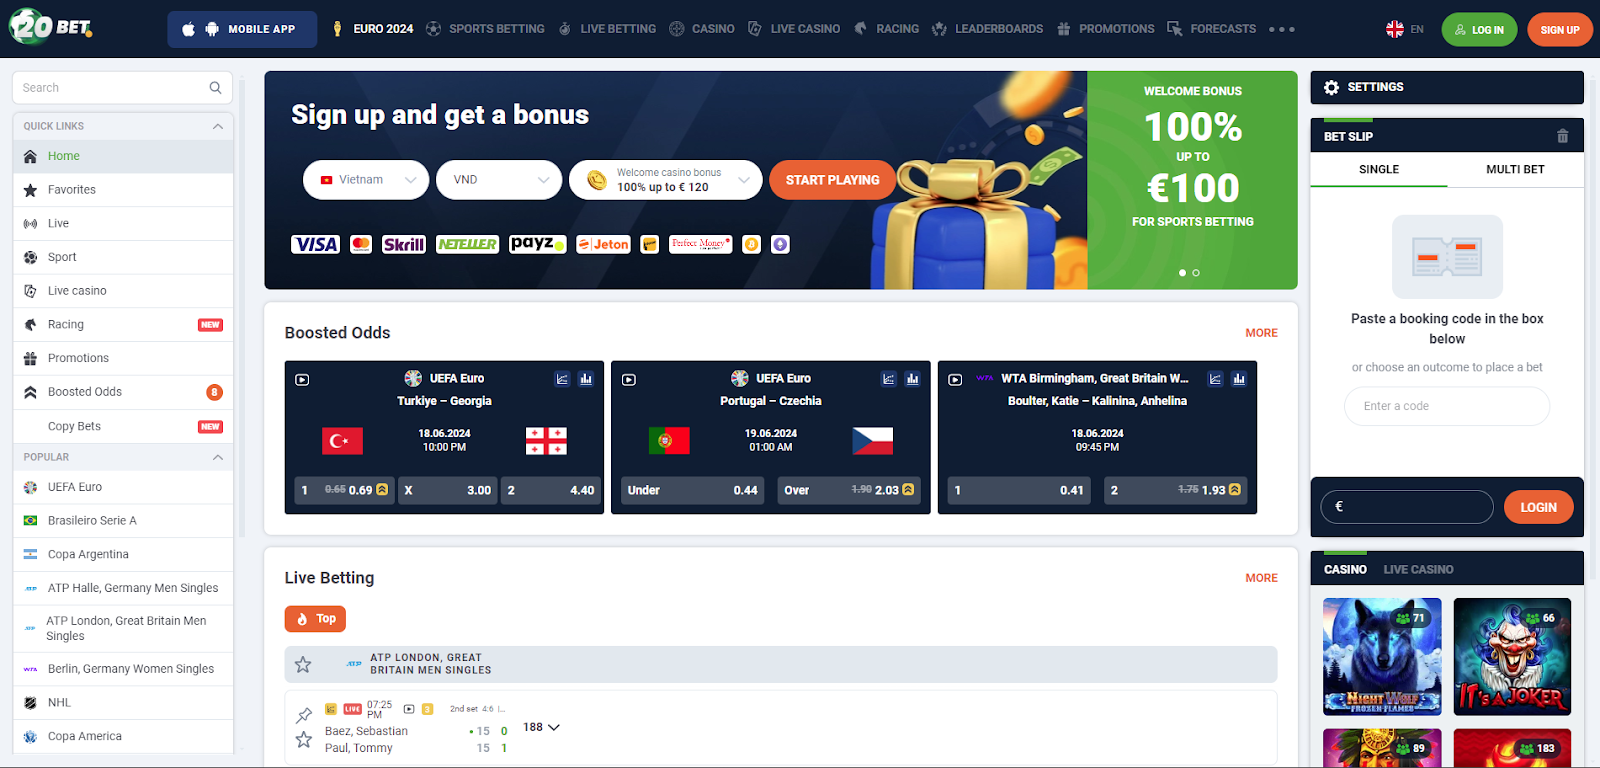 How to Bet on The T20 World Cup on 20Bet - Top Bets, Tips, Etc